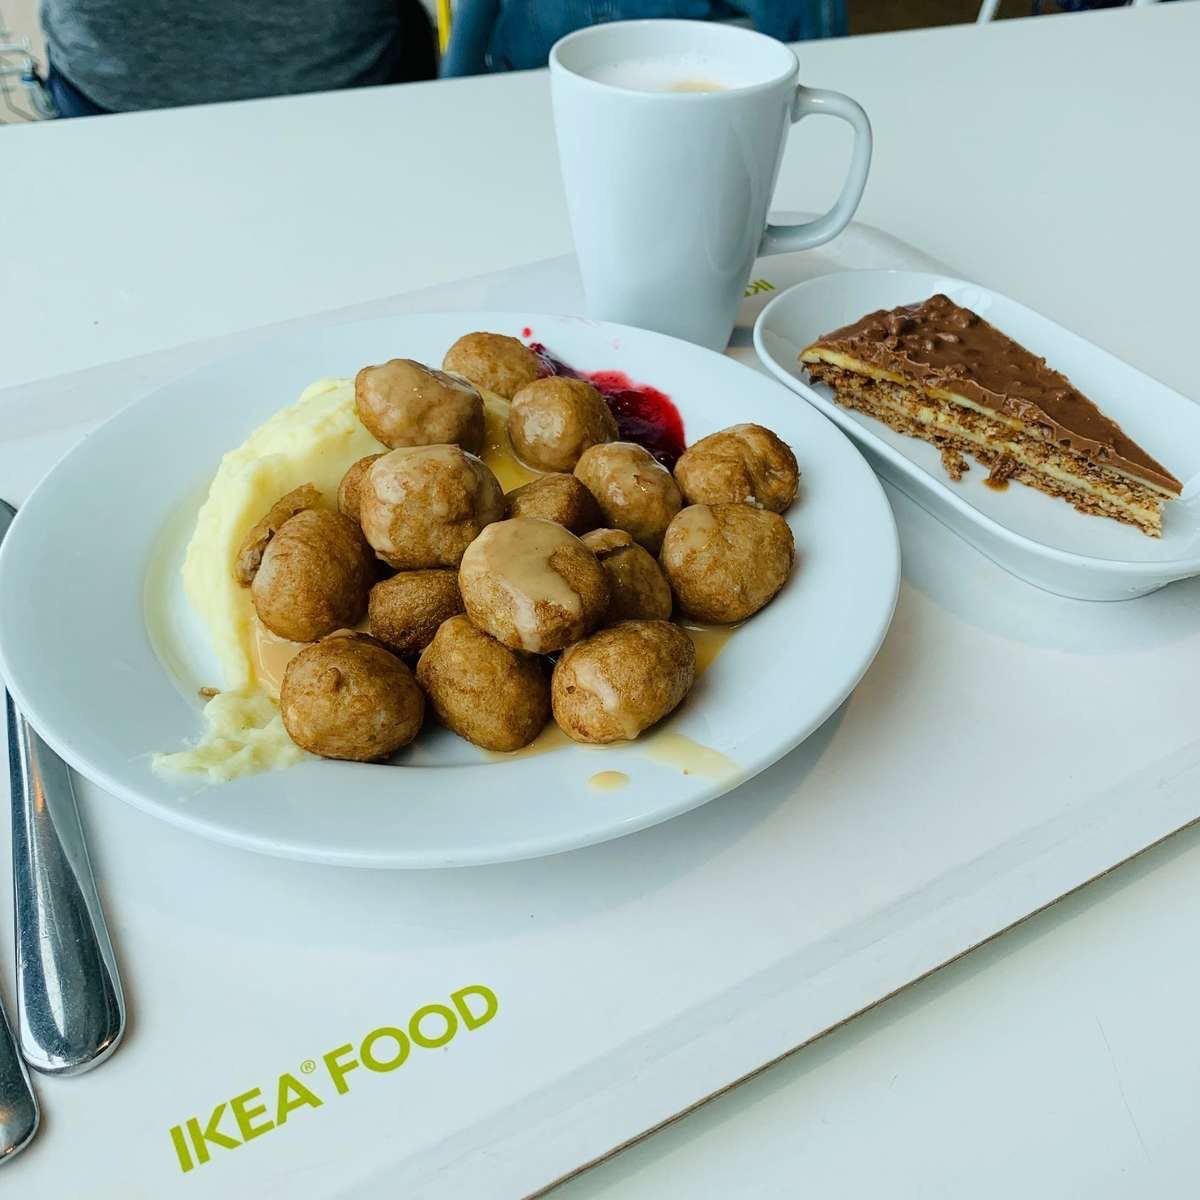 IKEA Restaurant  Caf - Tempe - Northern Rivers Accommodation